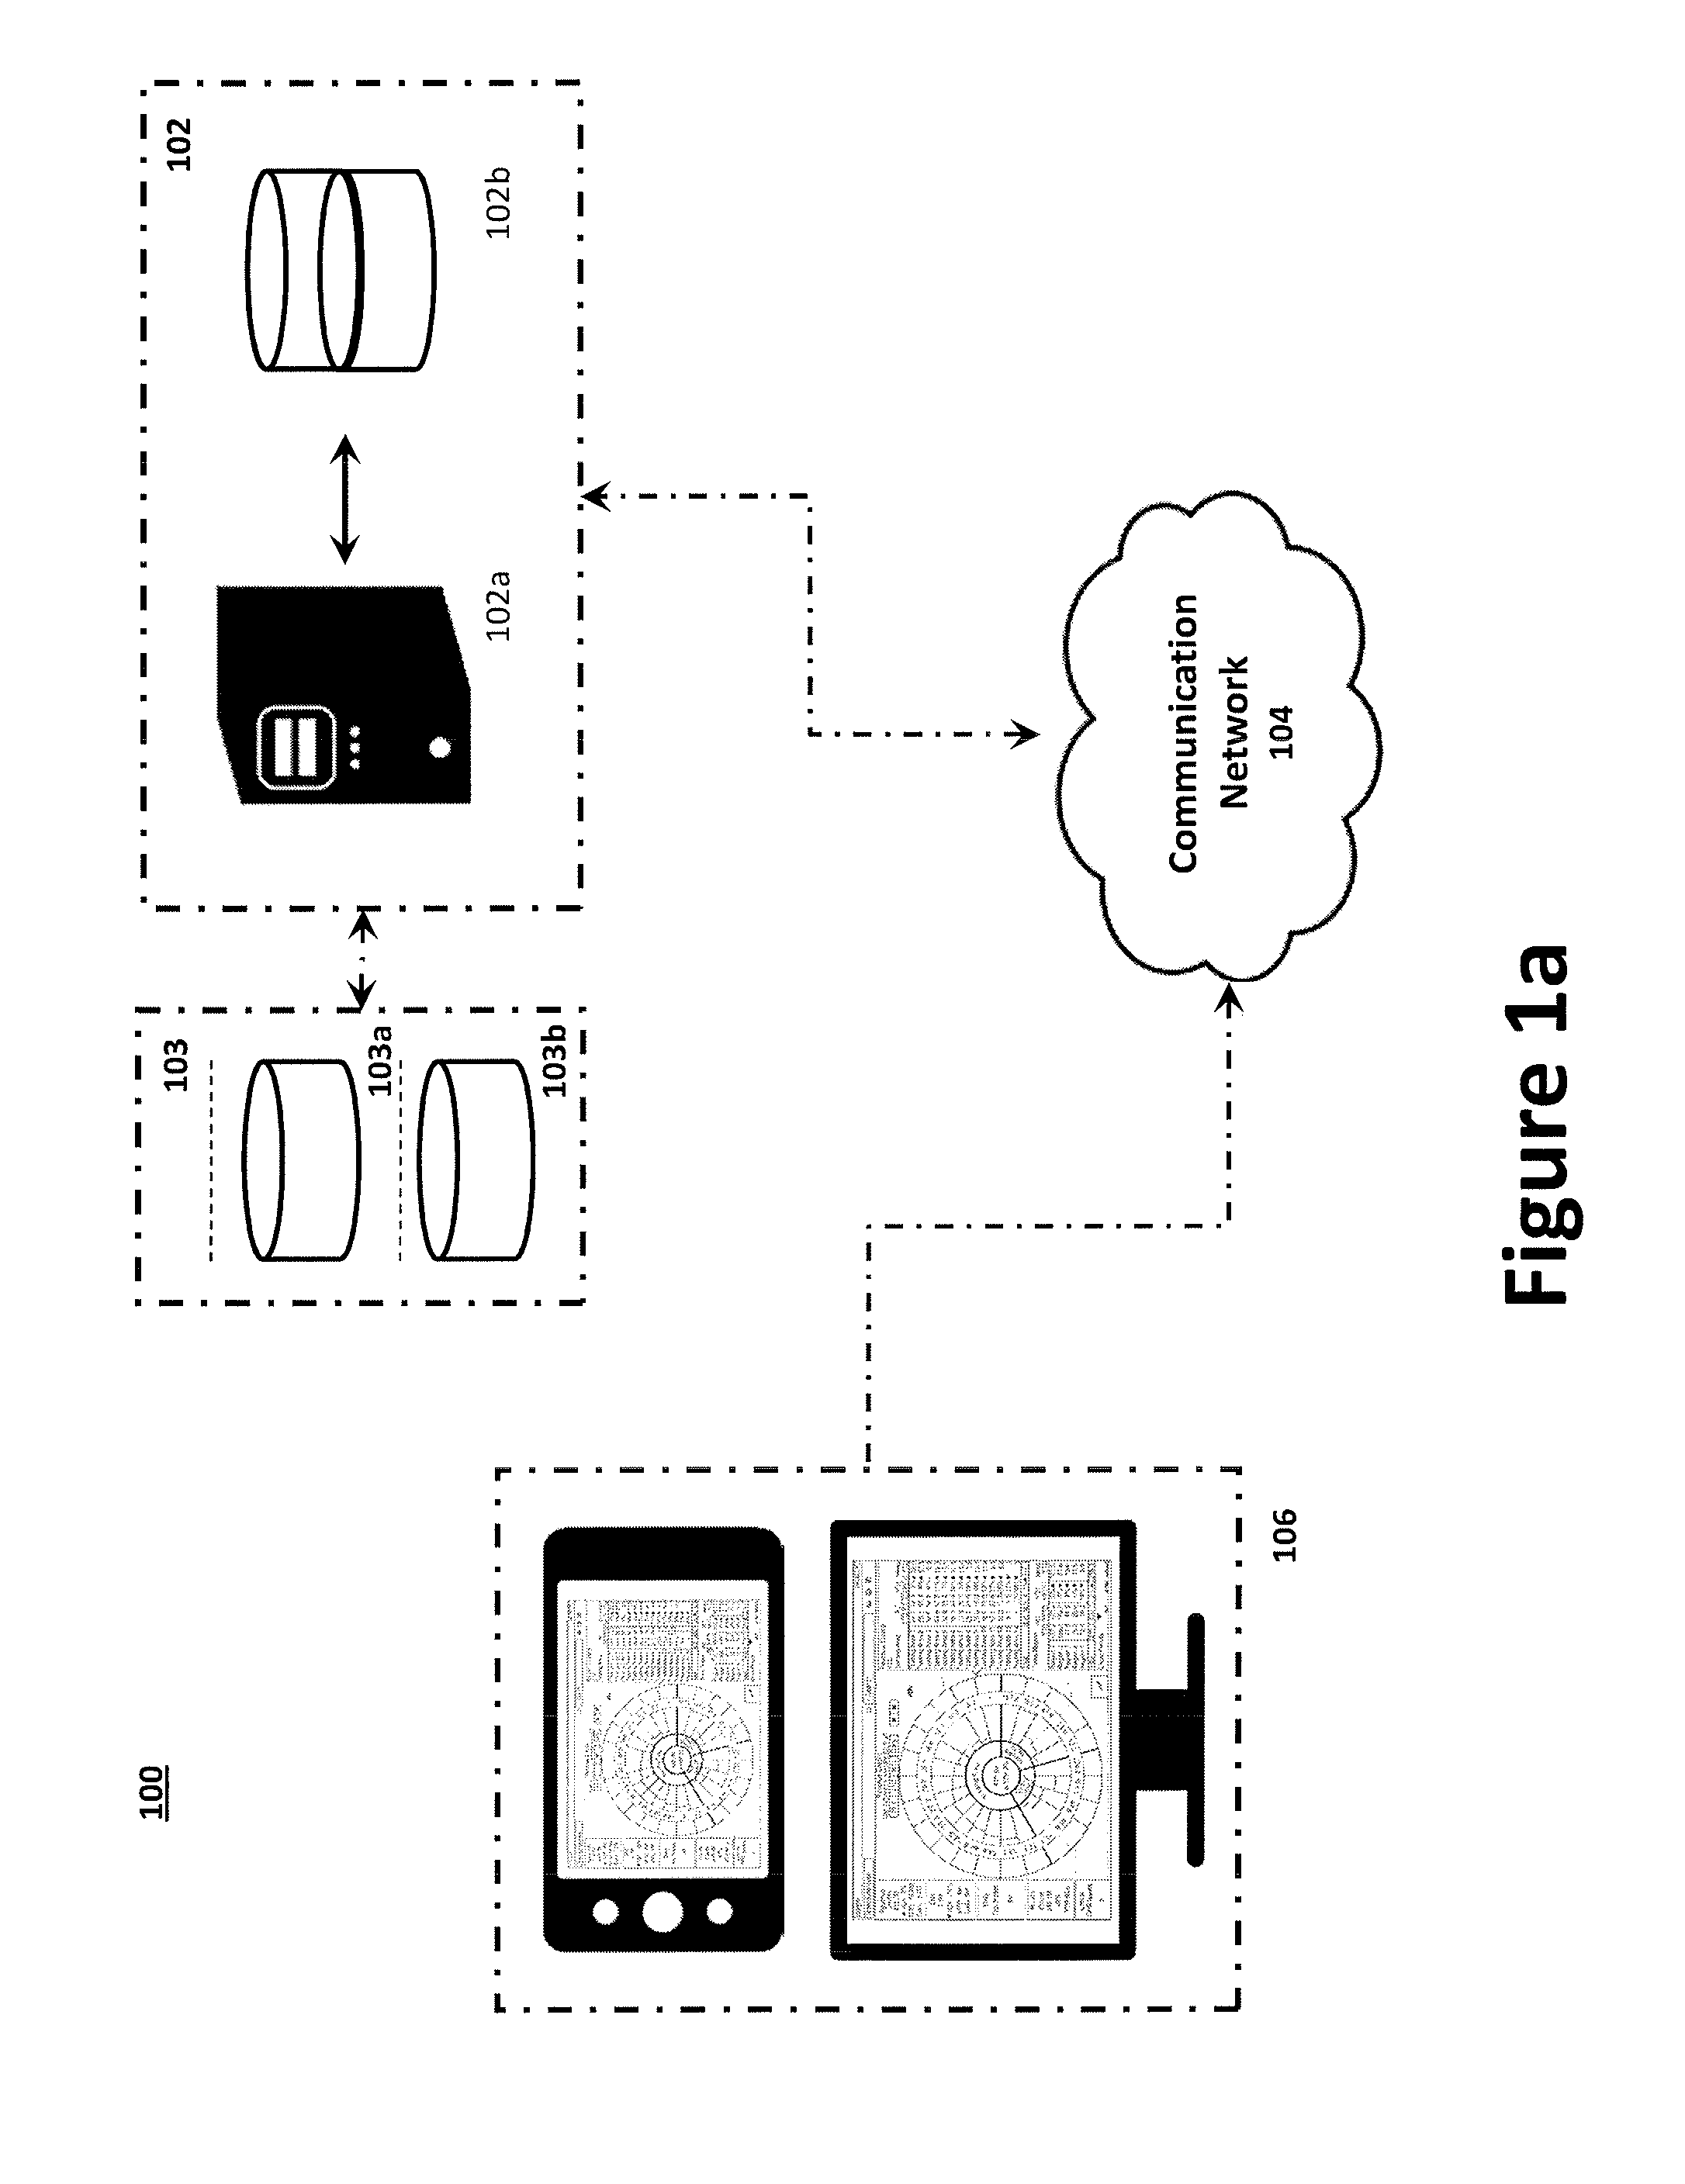 System and method for facilitating interactive data visualization and manipulation